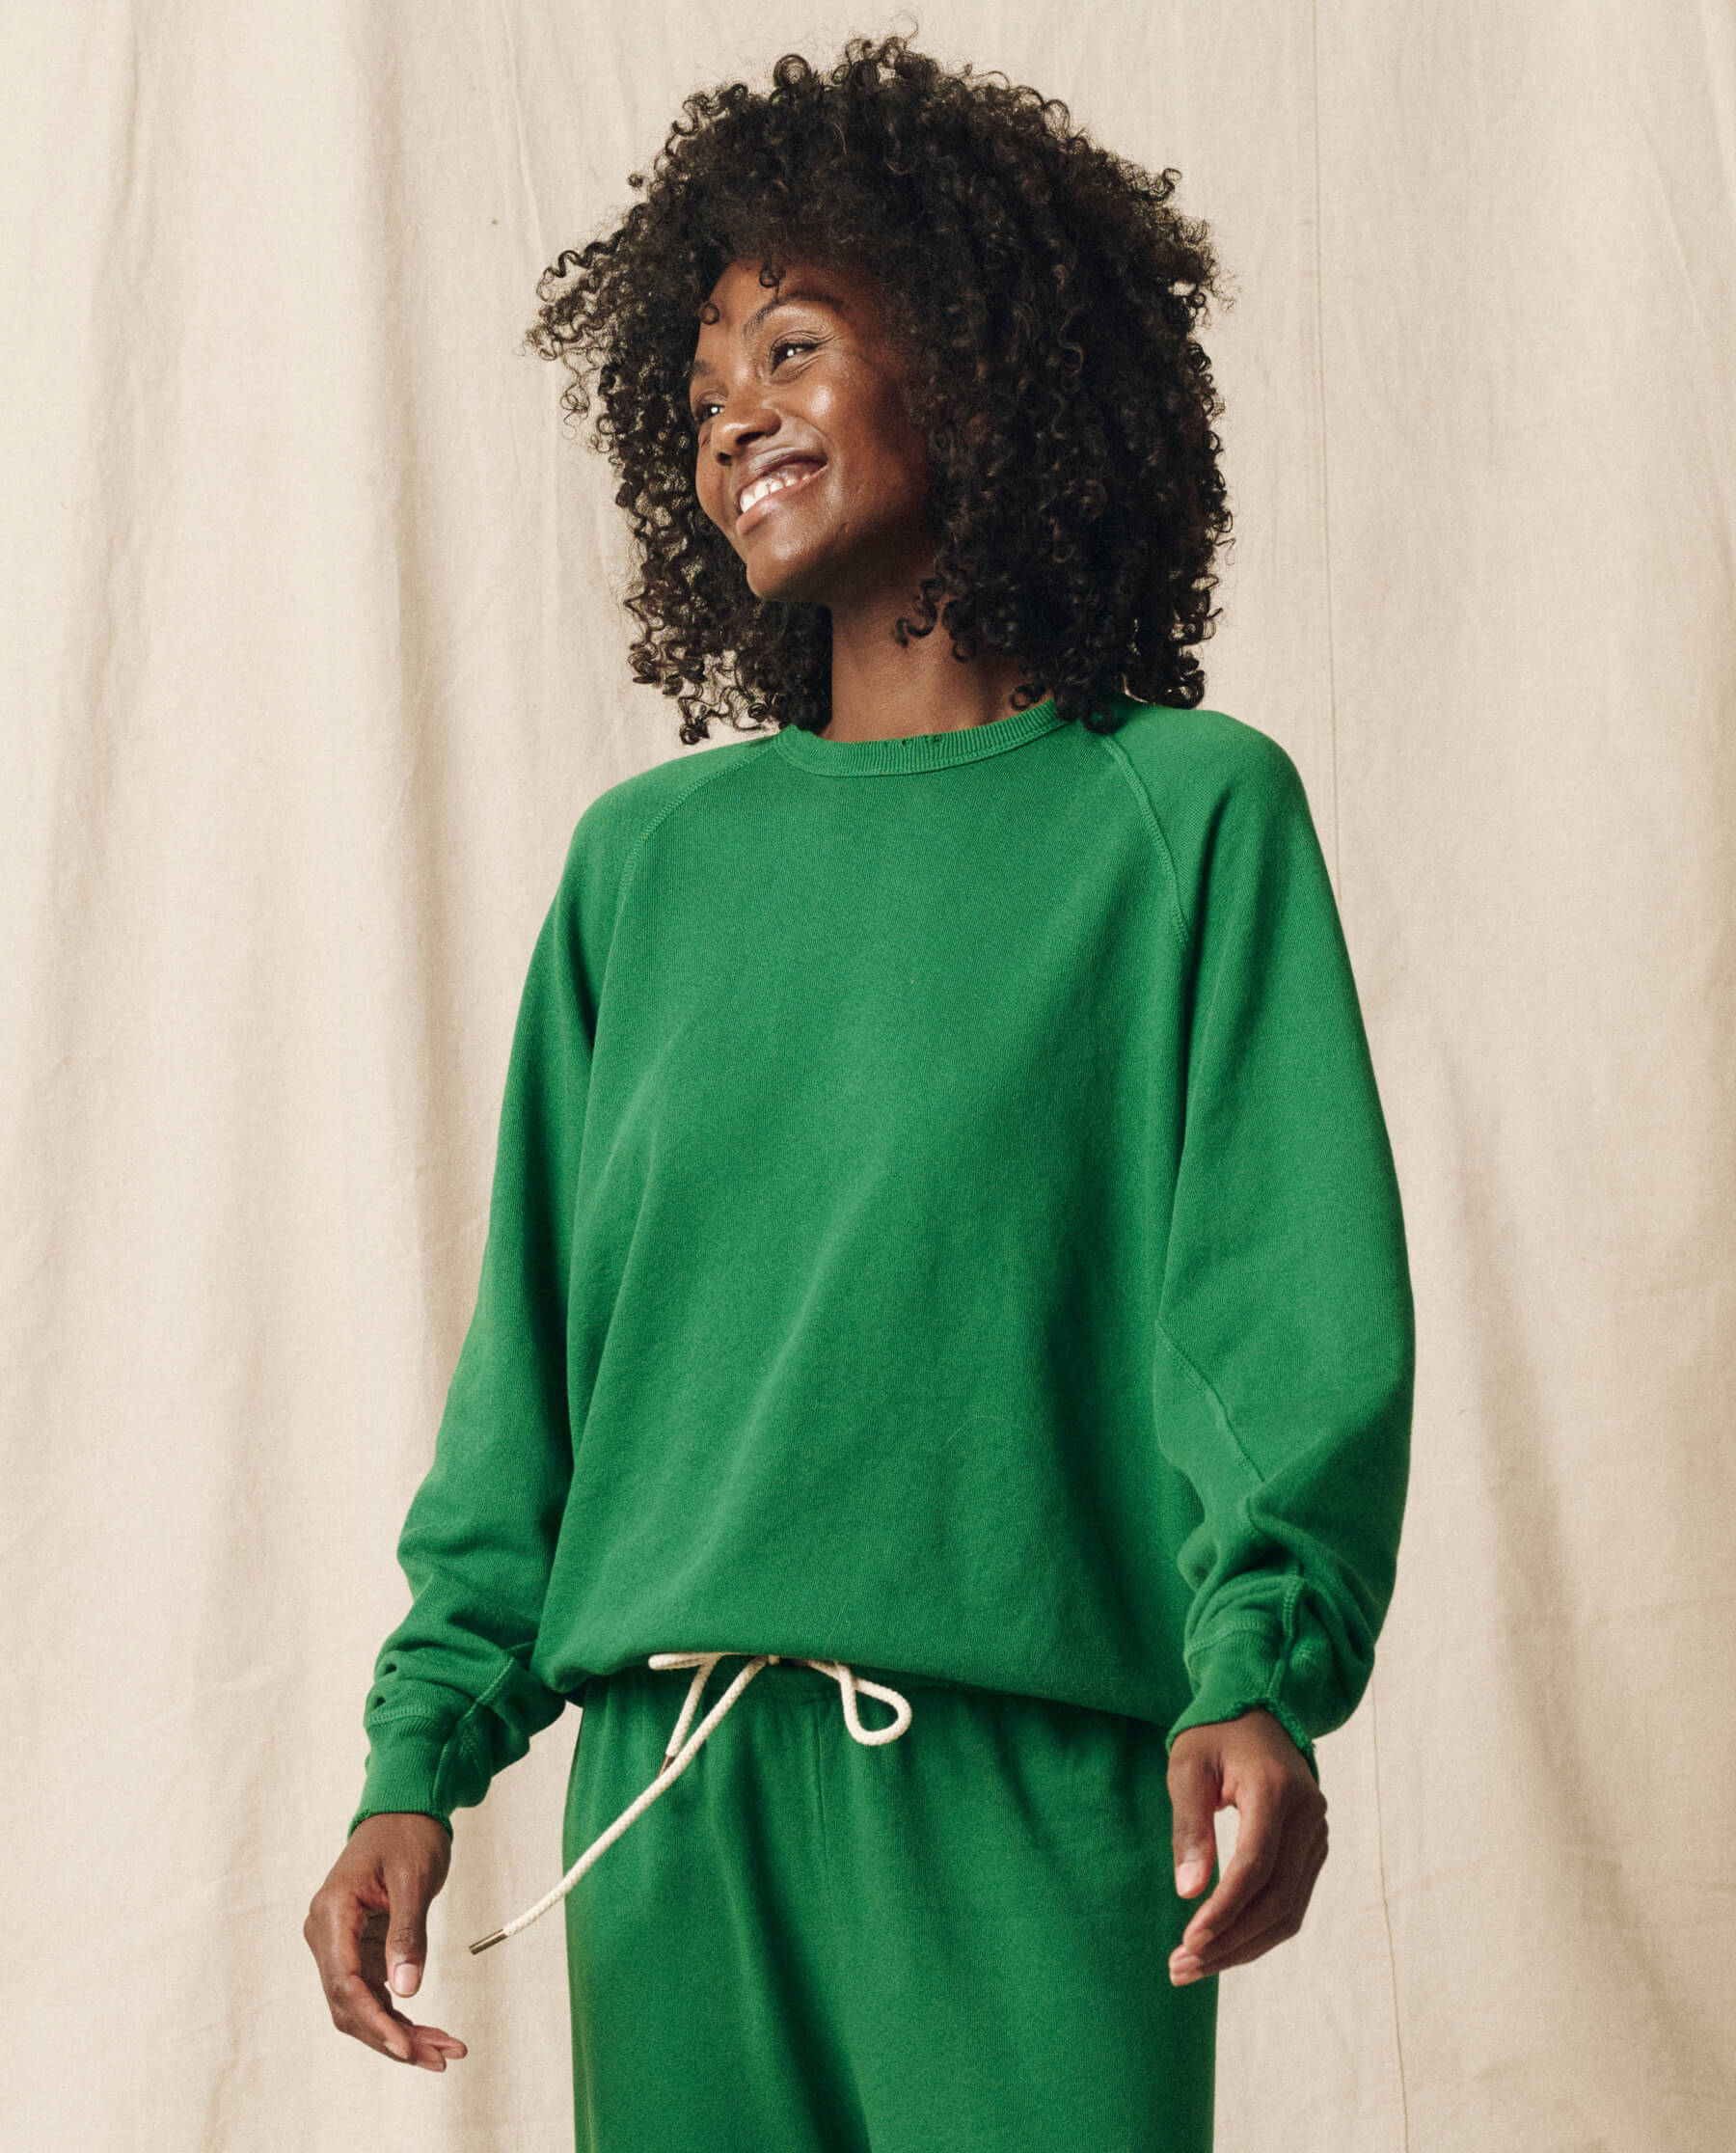 The College Sweatshirt. Solid -- Holly Leaf SWEATSHIRTS THE GREAT. HOL 23 KNITS